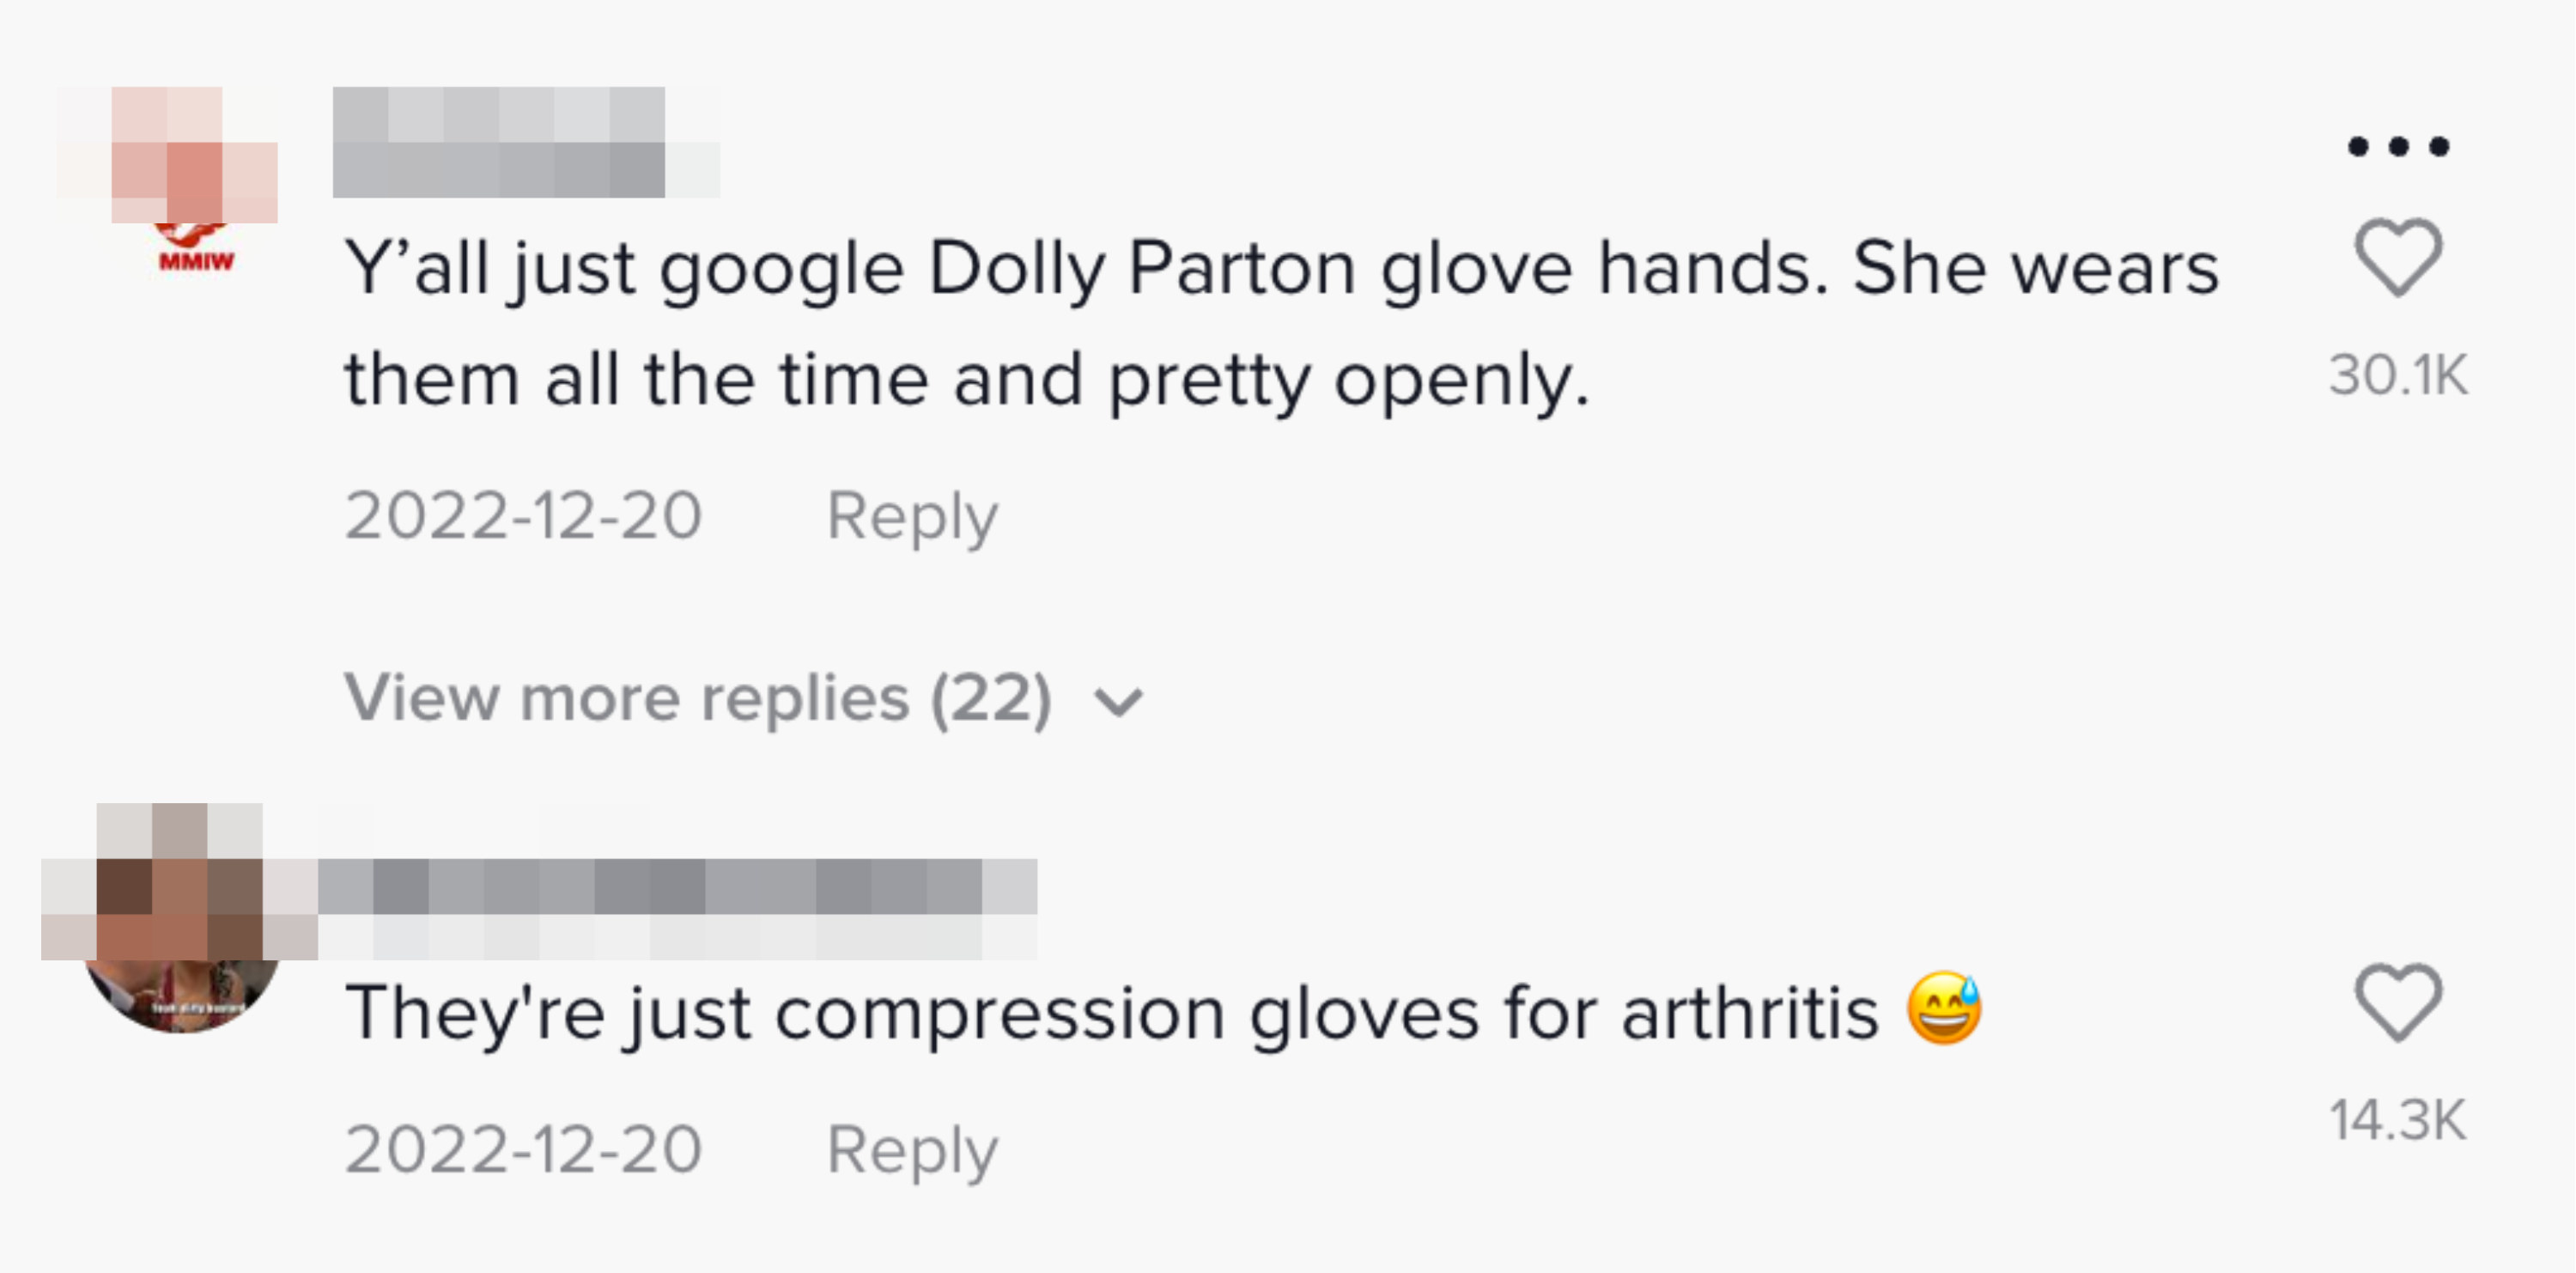 One person said she wears them all the time and another said &quot;They&#x27;re just compression gloves for arthritis&quot;